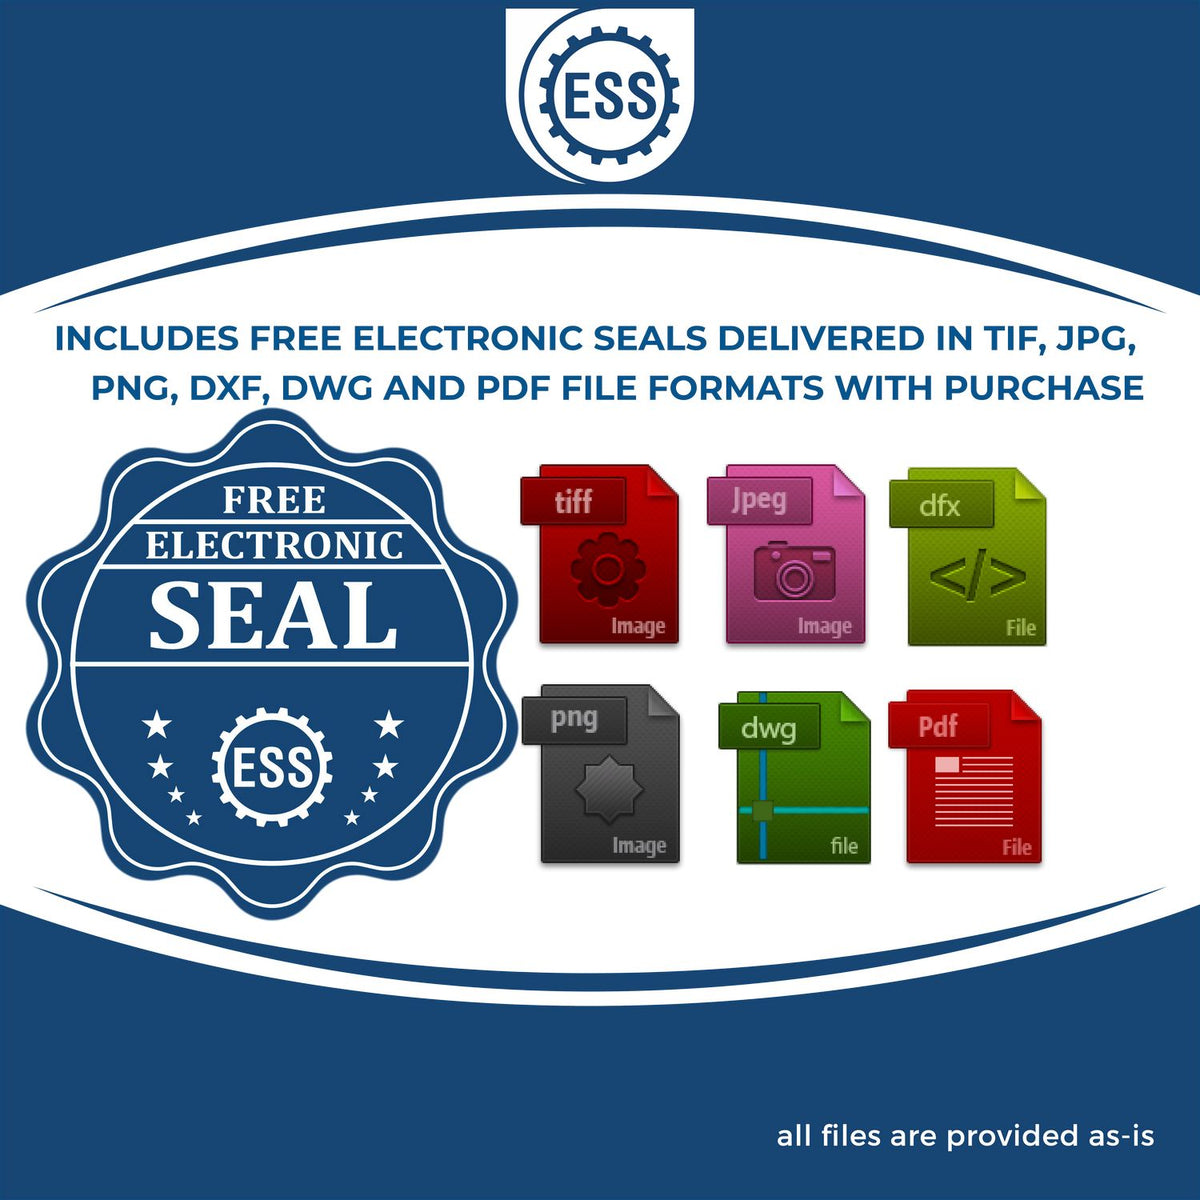 An infographic for the free electronic seal for the Hybrid Ohio Geologist Seal illustrating the different file type icons such as DXF, DWG, TIF, JPG and PNG.